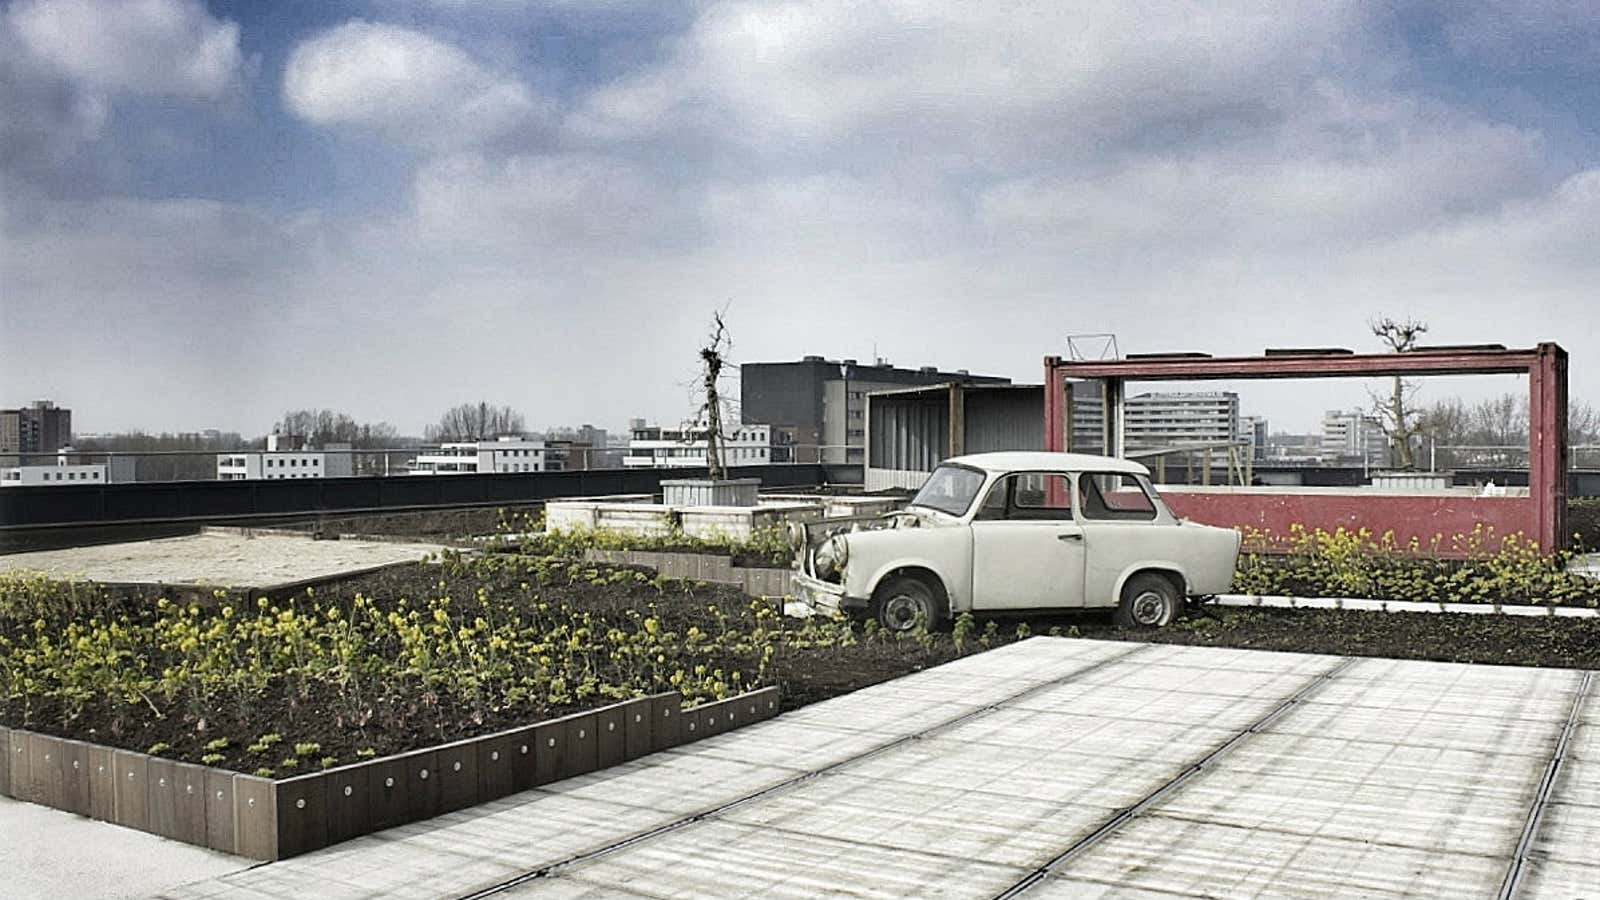 At the rooftop of B Amsterdam, a coworking space located in the former IBM headquarters, members grow their own food on this roof garden.